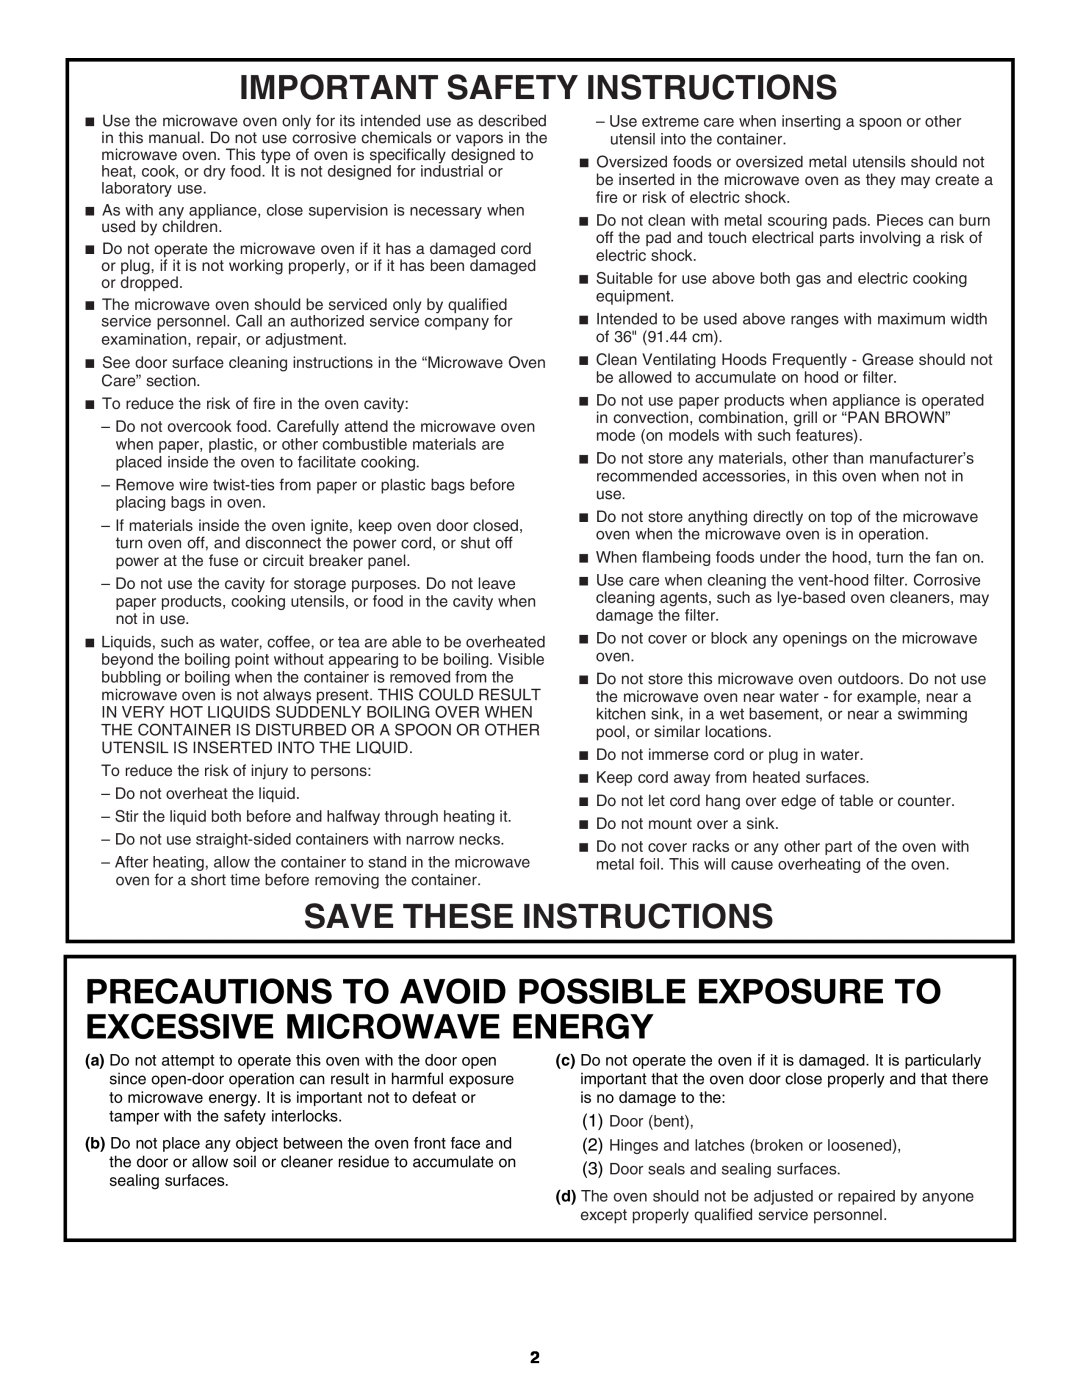 Maytag W10274531A Precautions To Avoid Possible Exposure To Excessive Microwave Energy, Important Safety Instructions 